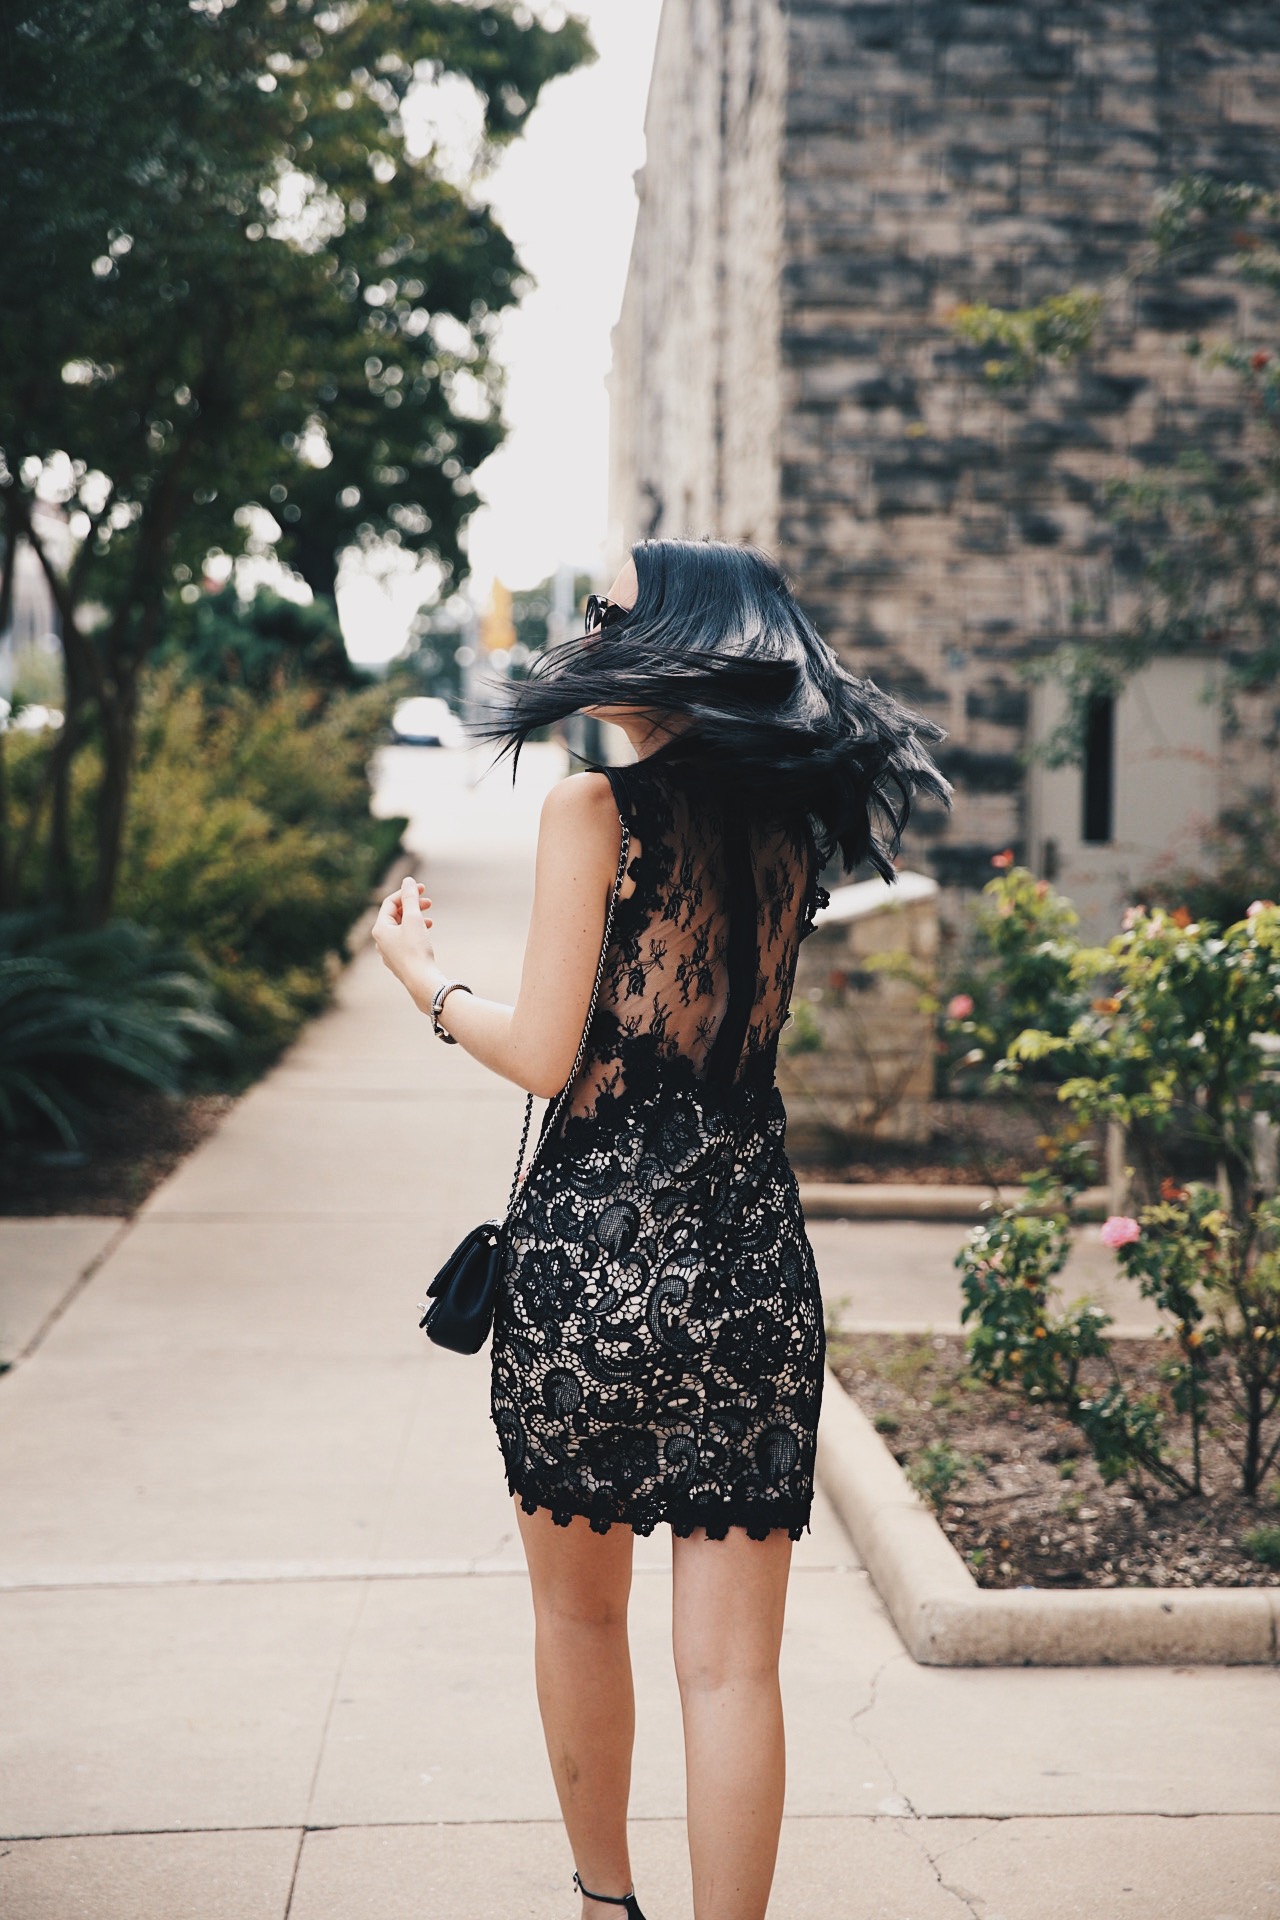 DTKAustin is sharing the perfect affordable, little black lace dress for Fall from Red Dress Boutique. | how to wear a lace dress | lace dress style tips | how to style a lace dress | date night outfit ideas | summer fashion tips | summer outfit ideas | summer style tips | what to wear for summer | warm weather fashion | fashion for summer | style tips for summer | outfit ideas for summer || Dressed to Kill